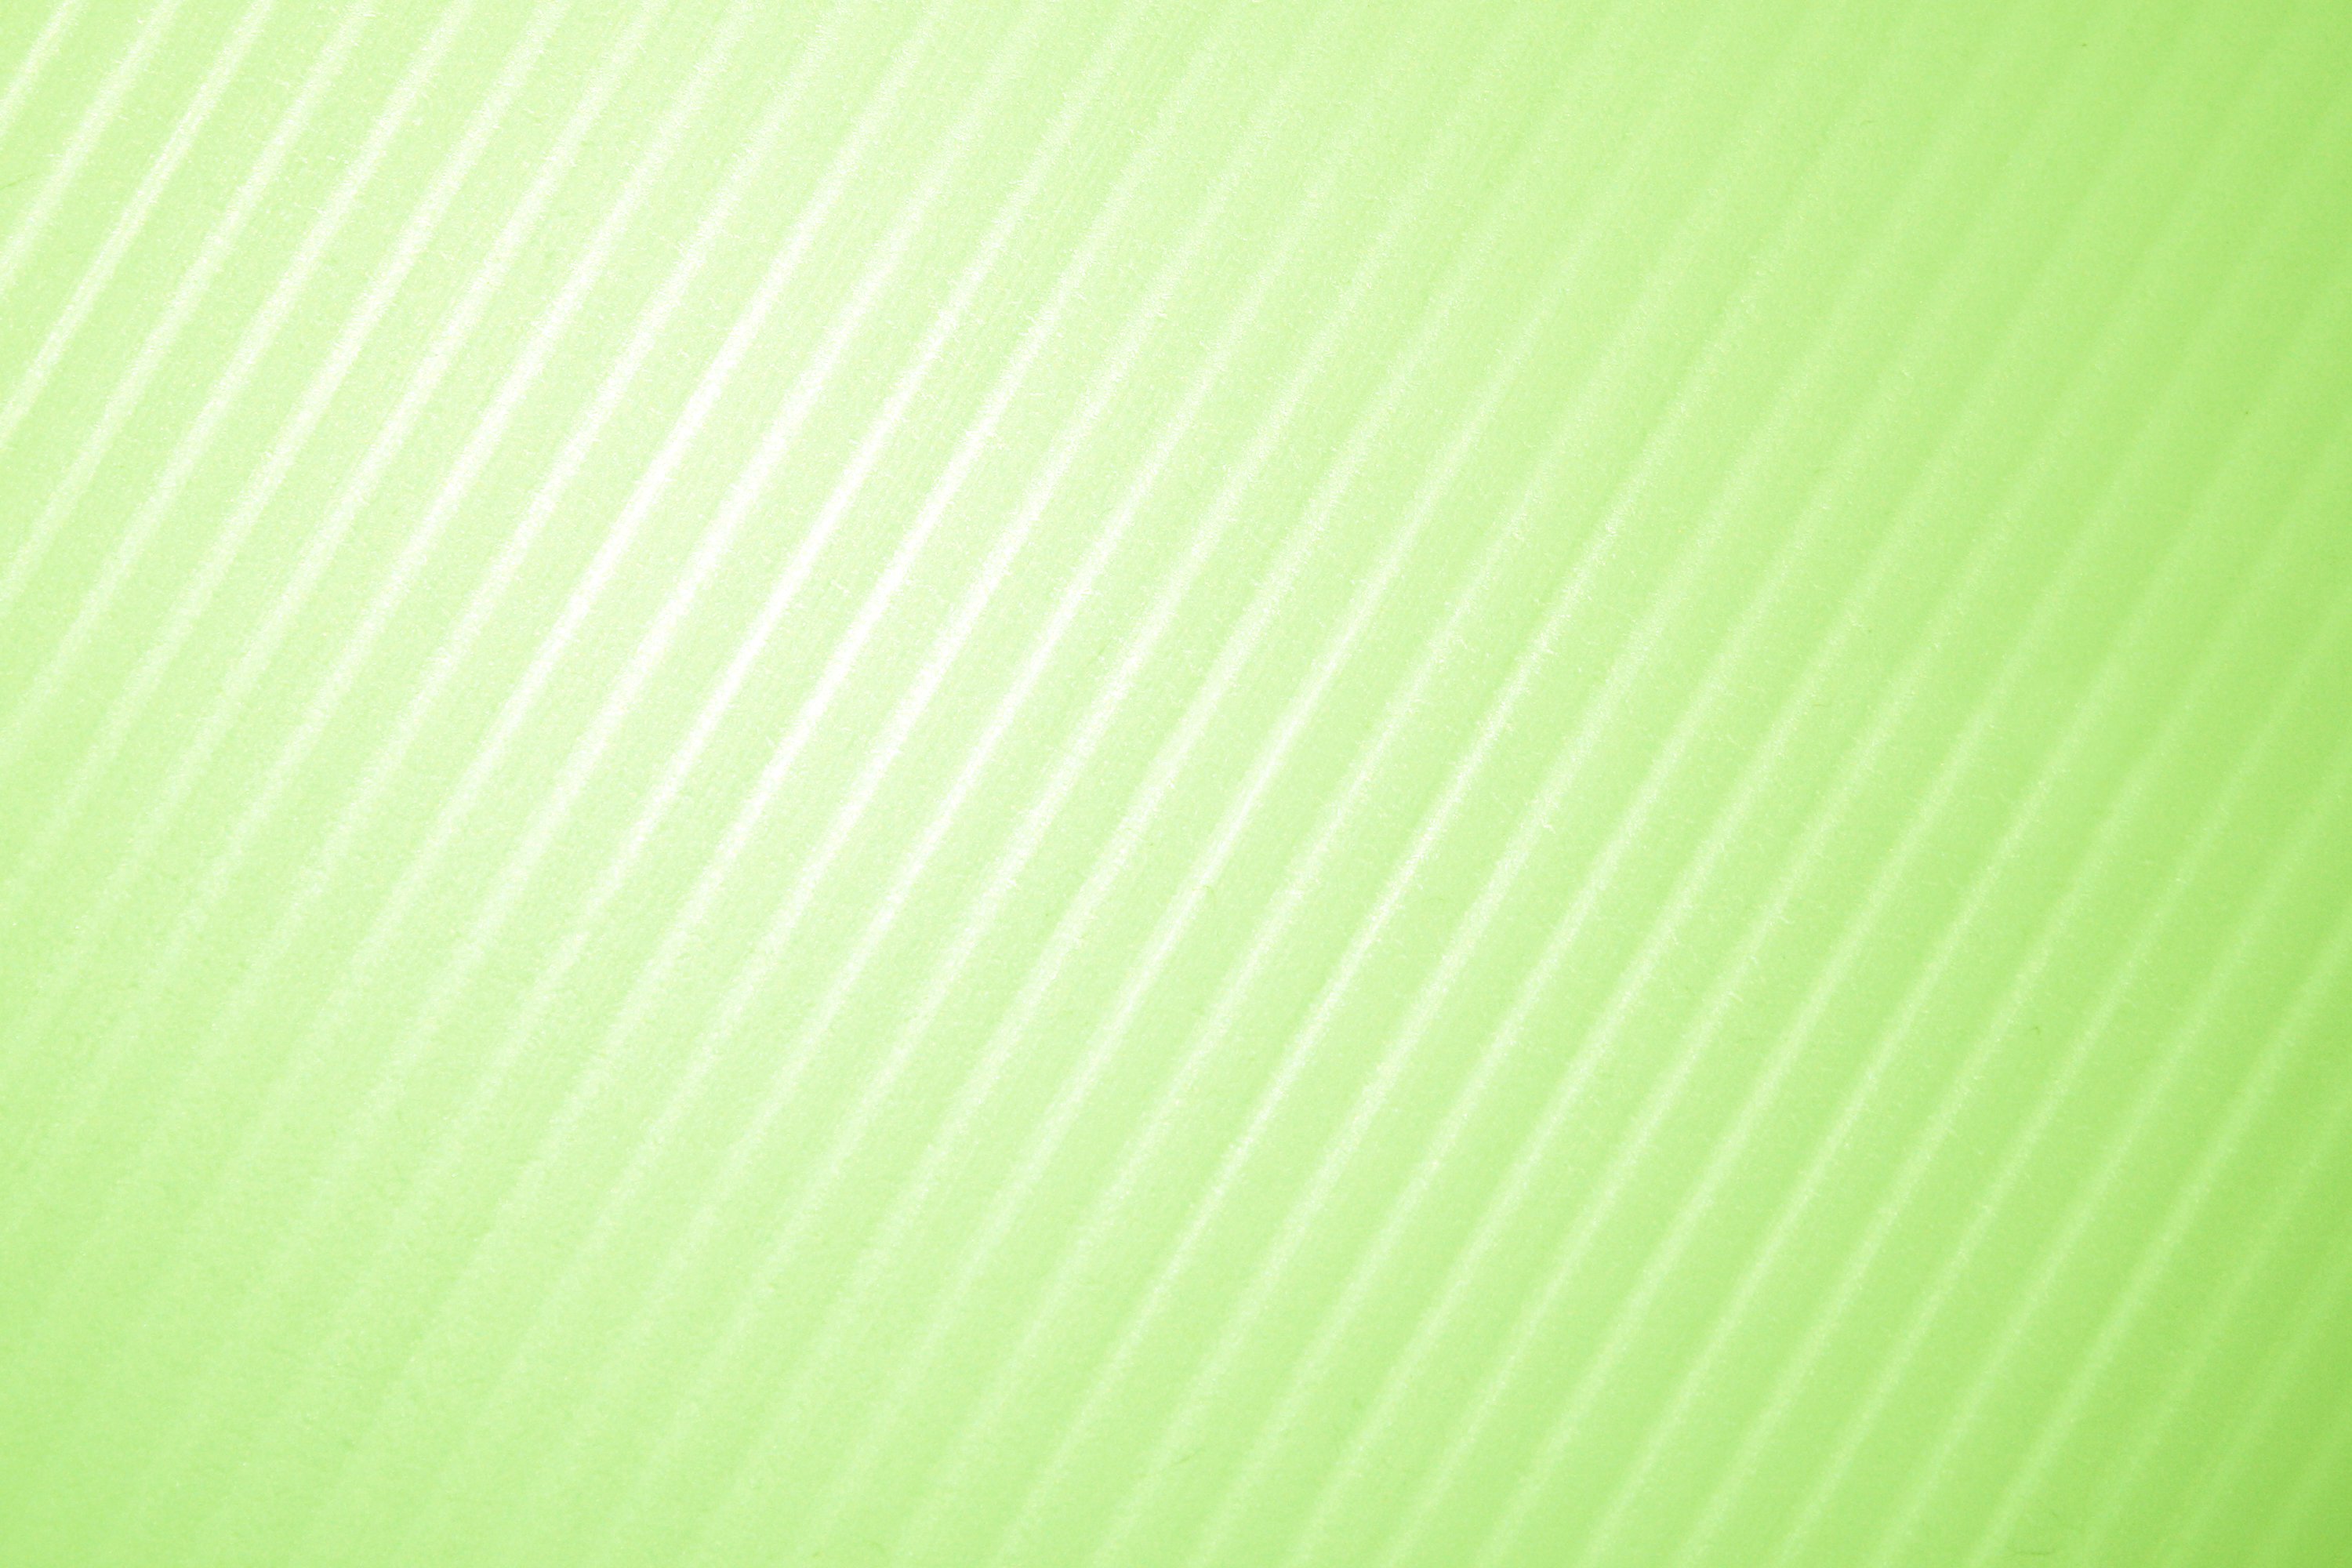 Lime Green Diagonal Striped Plastic Texture Picture Free Photograph